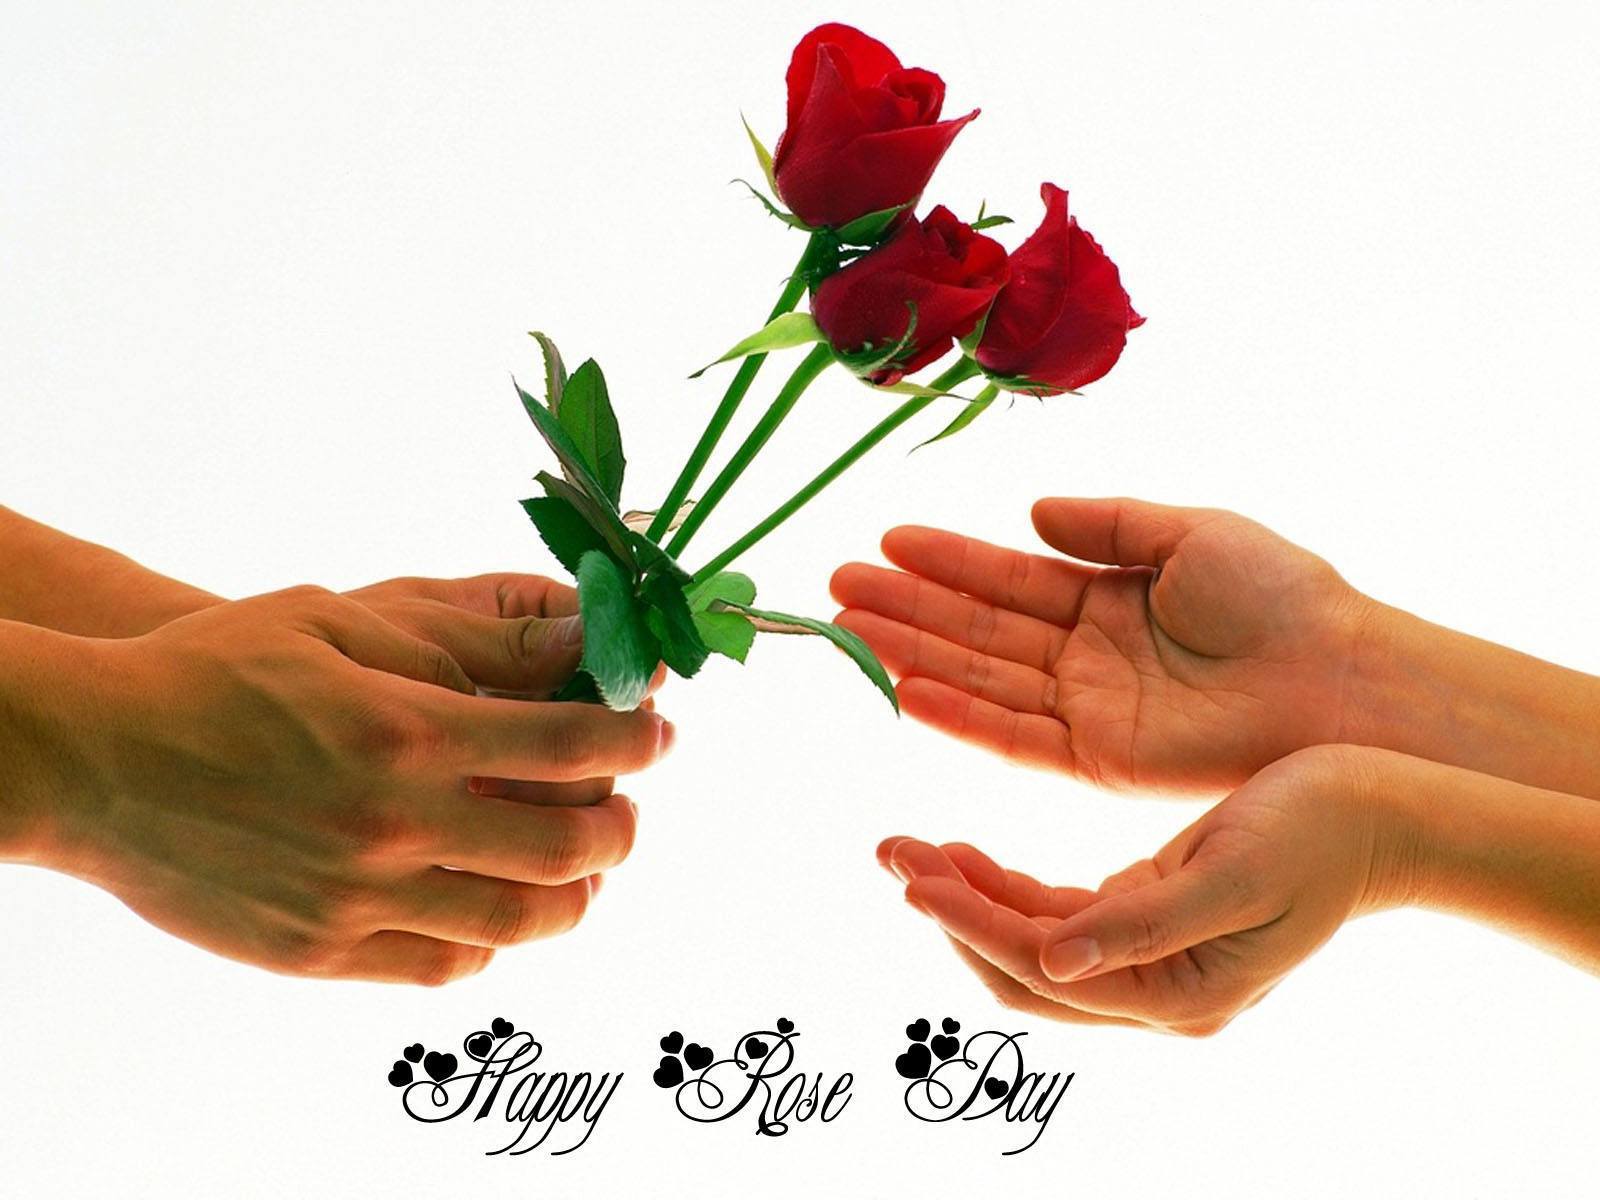 Highly Romantic Rose Day SMS, Wishes For Girlfriend Wife With Image